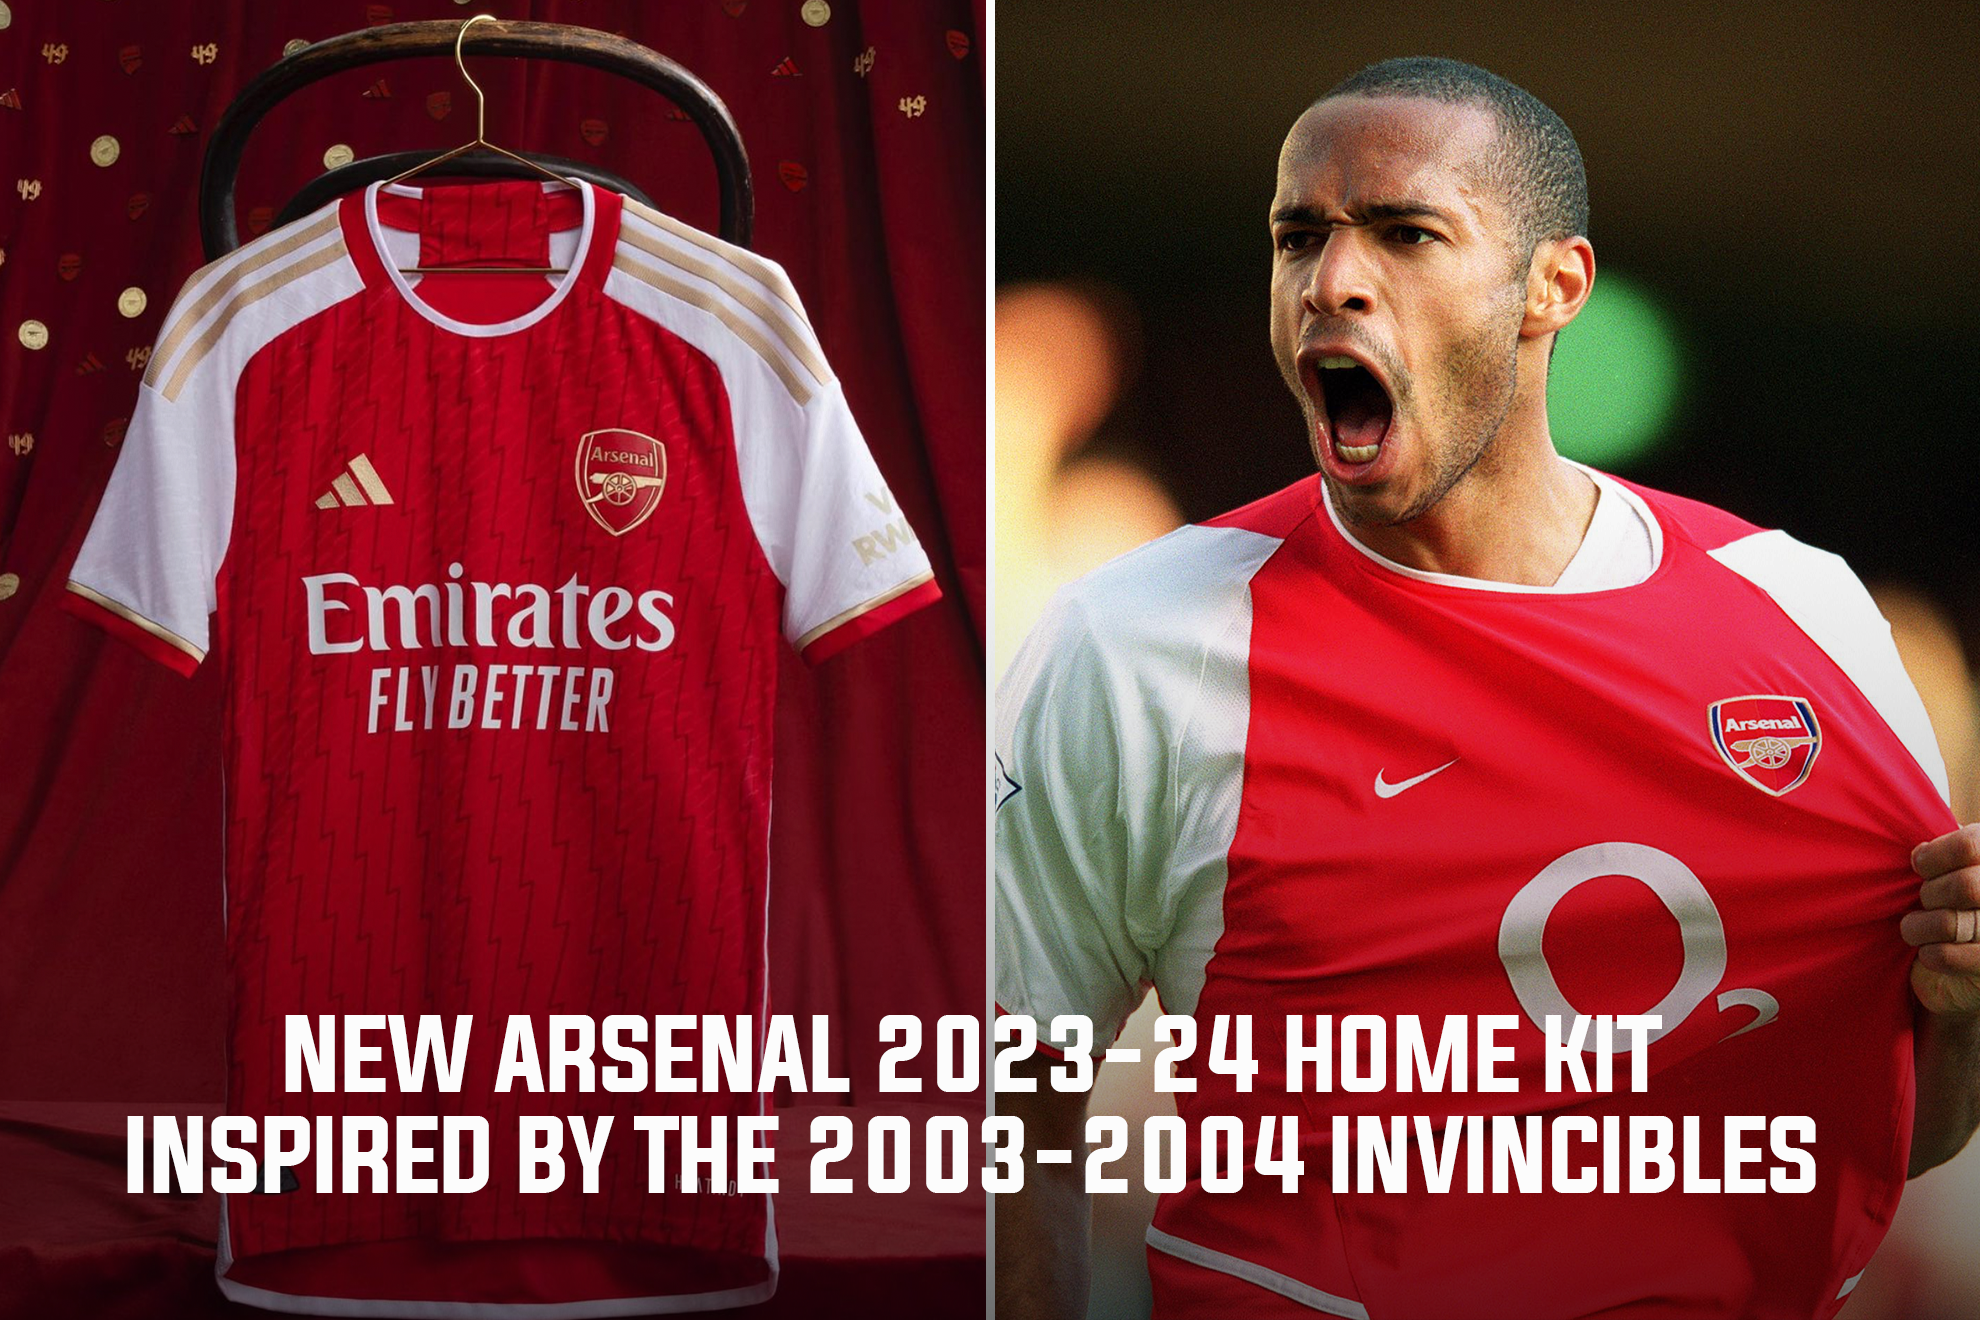 Adidas inspired by the invincibles for the new Arsenal home kit for the 2023-24 season.